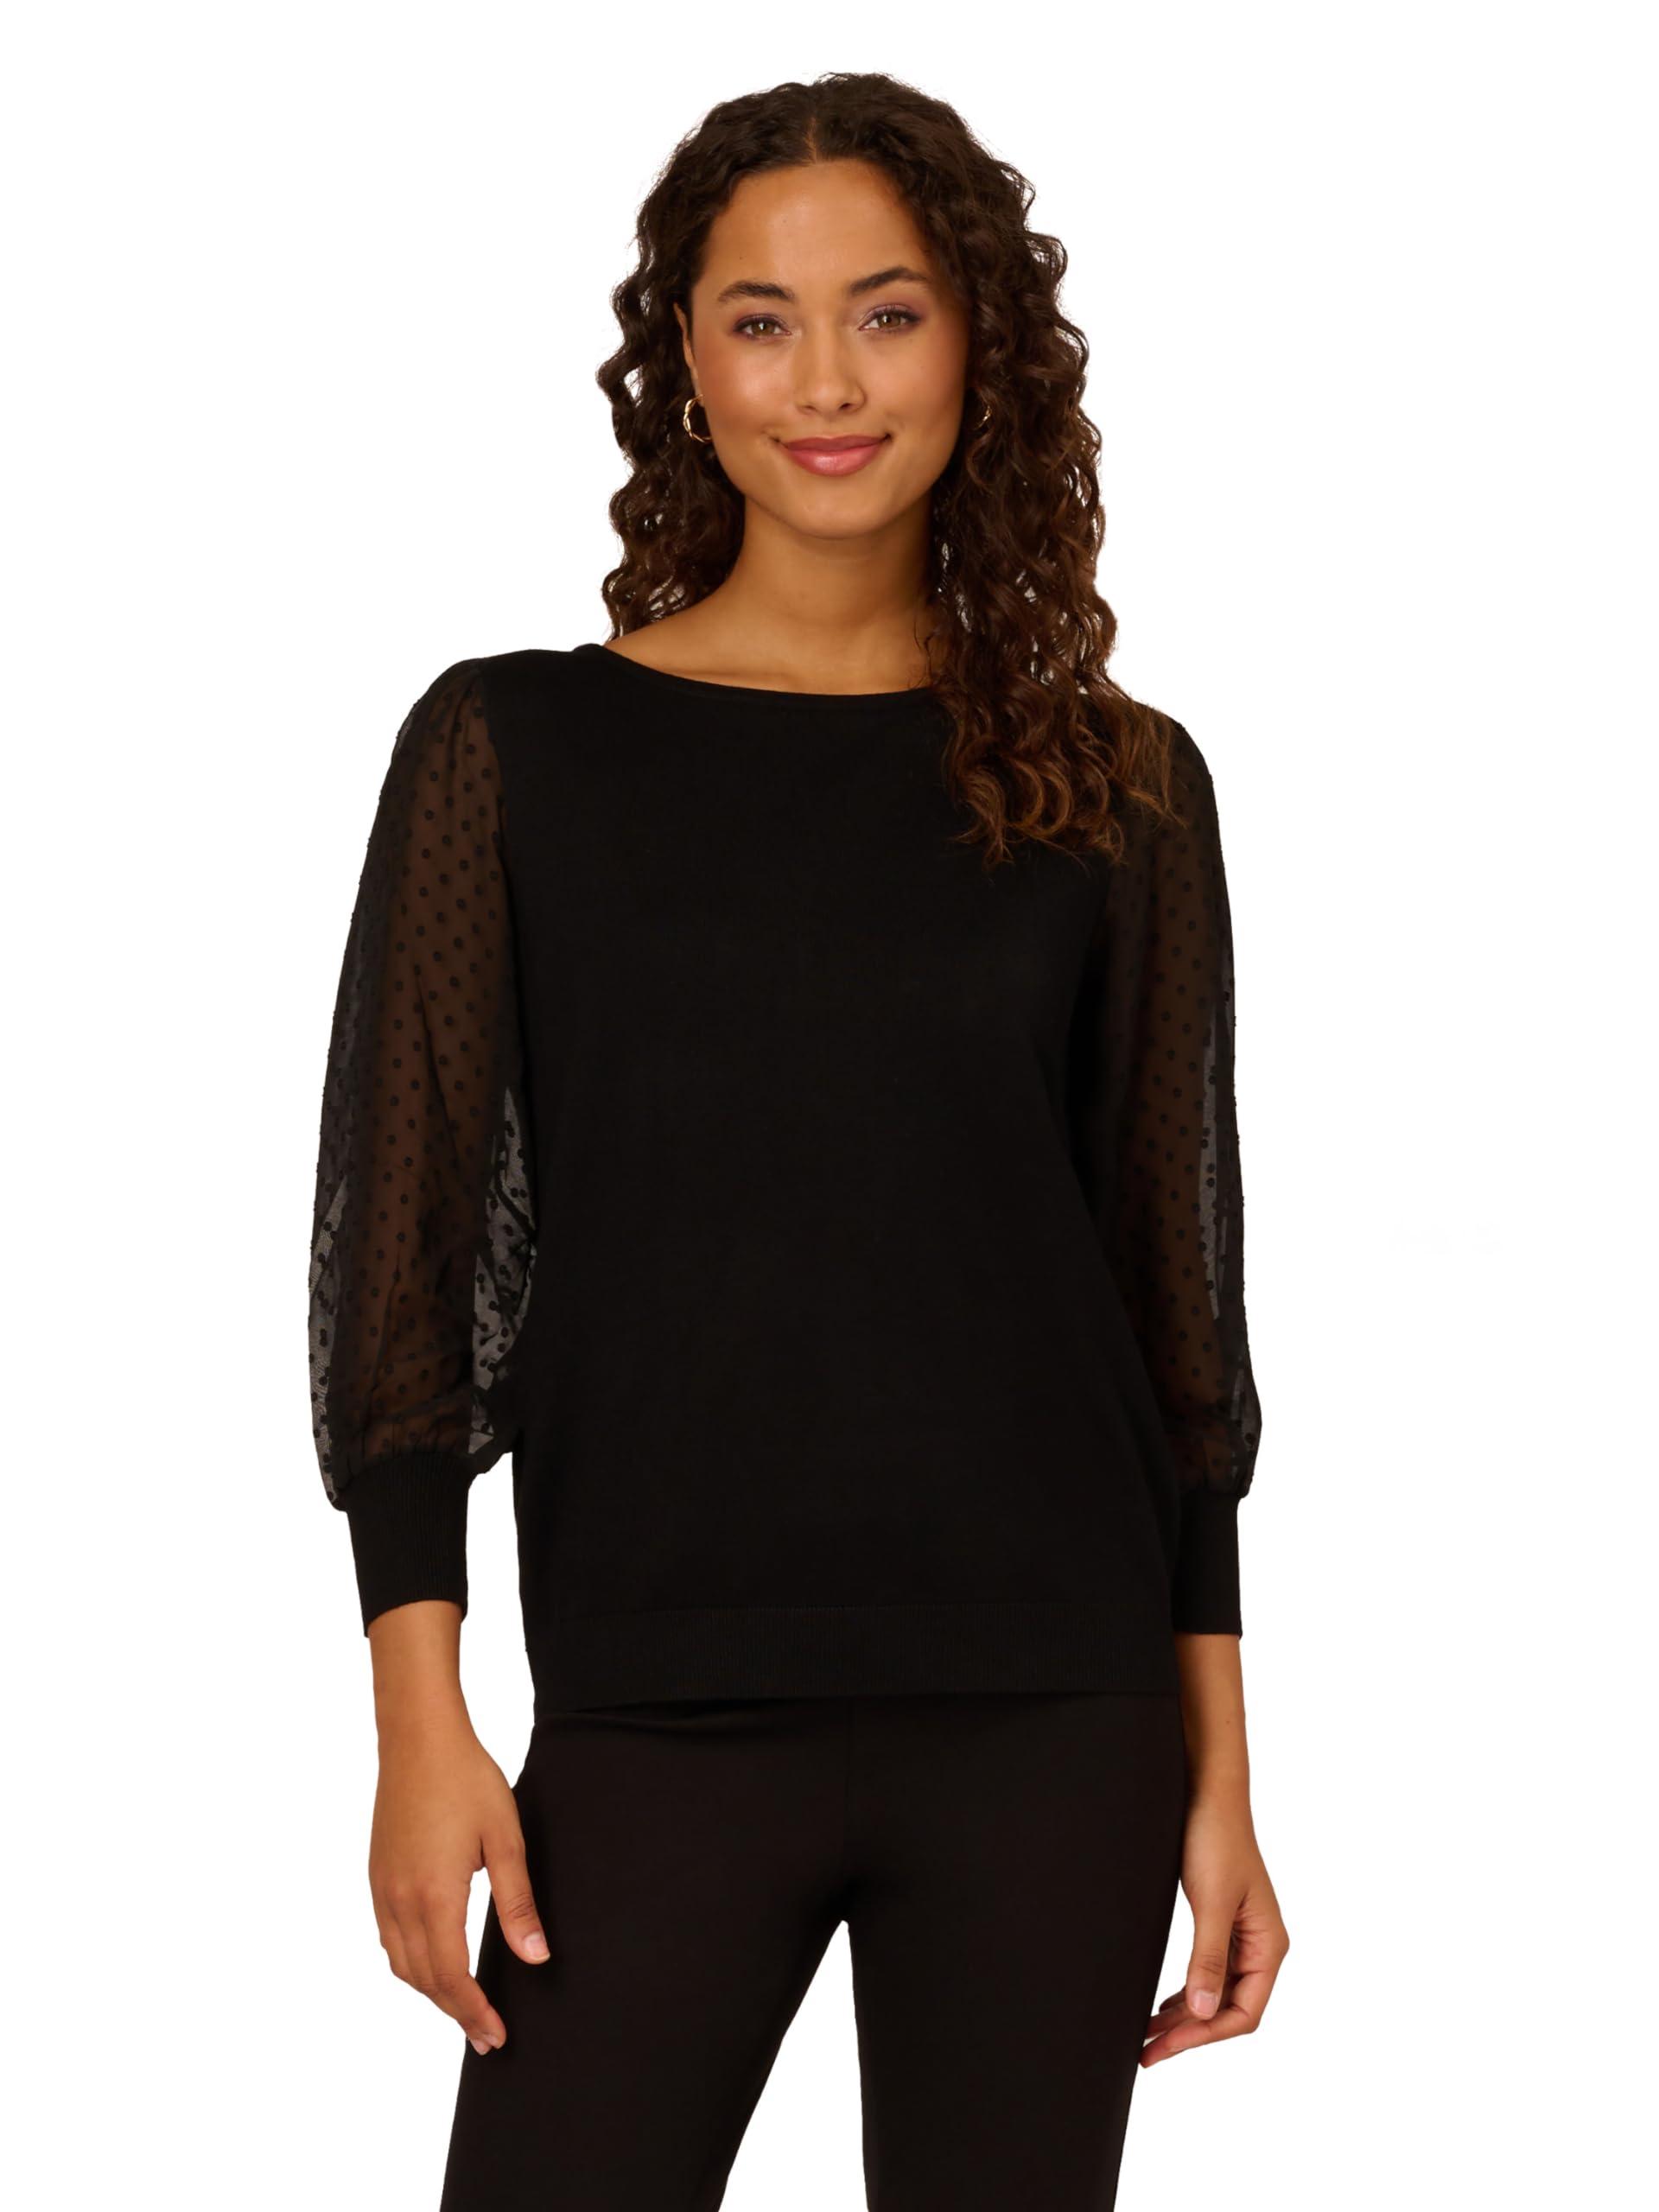 Adrianna Papell Bateau Neck Clip Dot 3/4 Sleeve Sweater in Black | Lyst